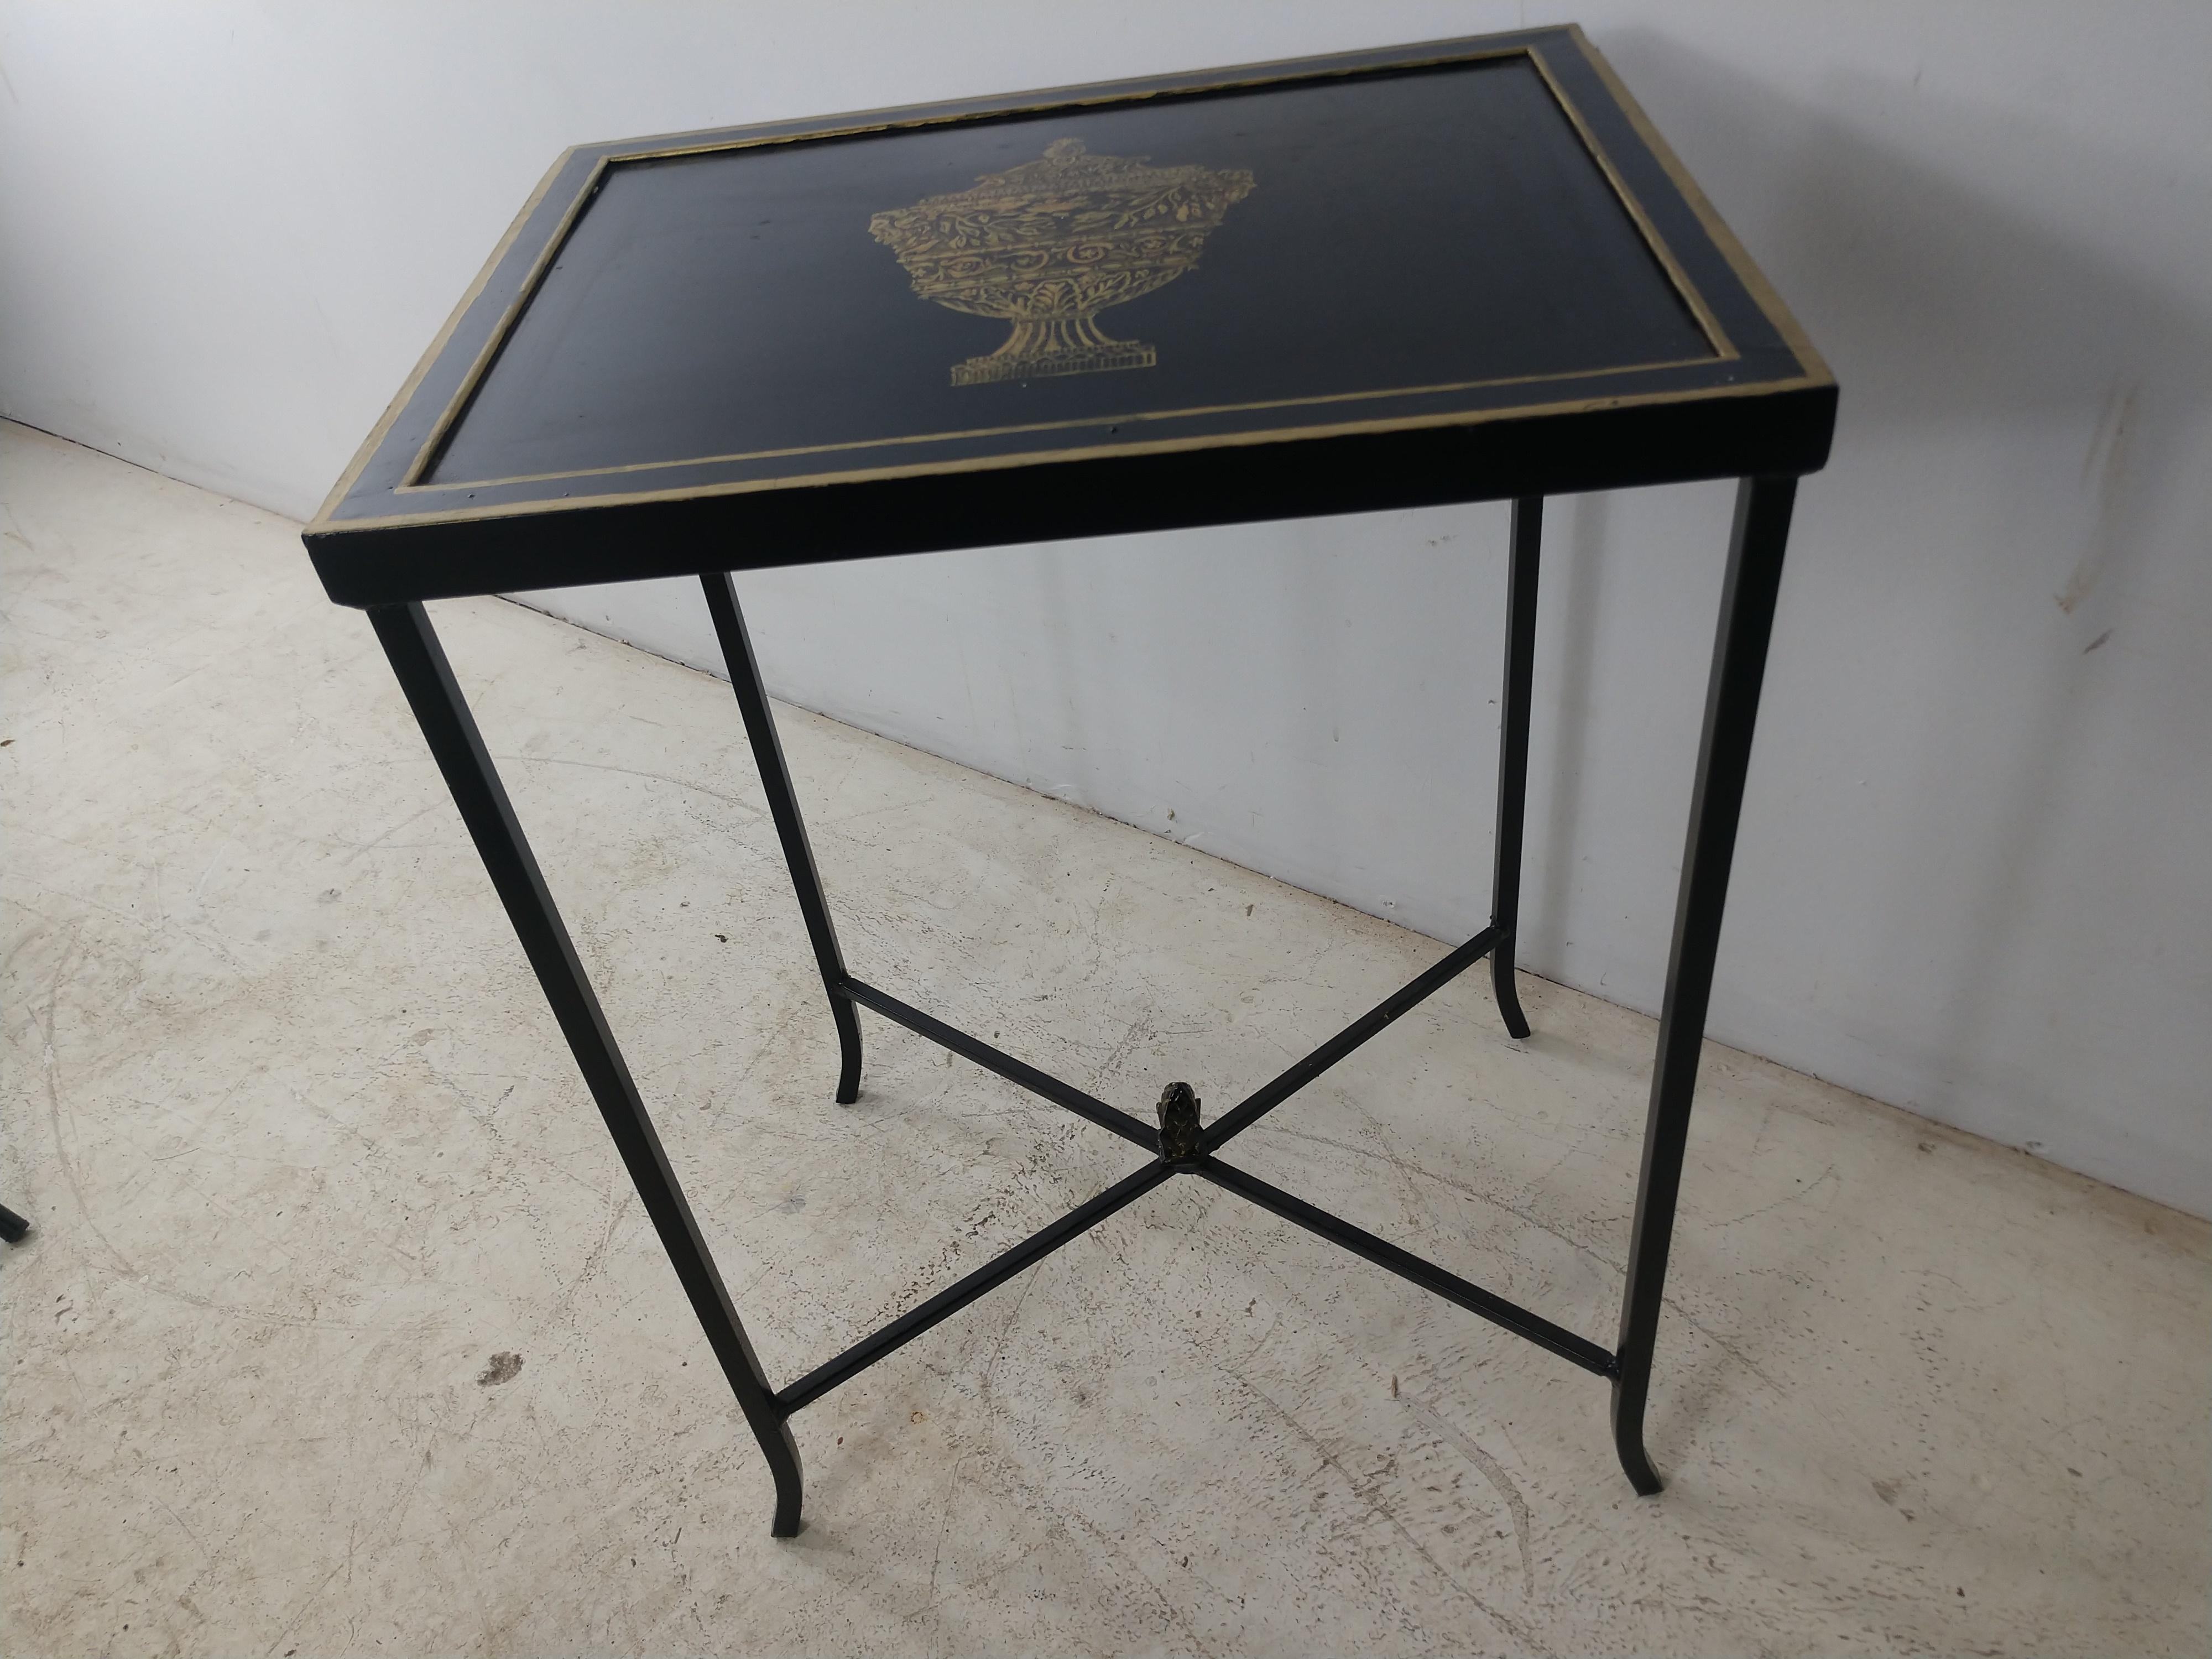 Simple and elegant toleware side table in black with gilt decorations. X-stretcher with acorn finial. This item can be parcel posted.